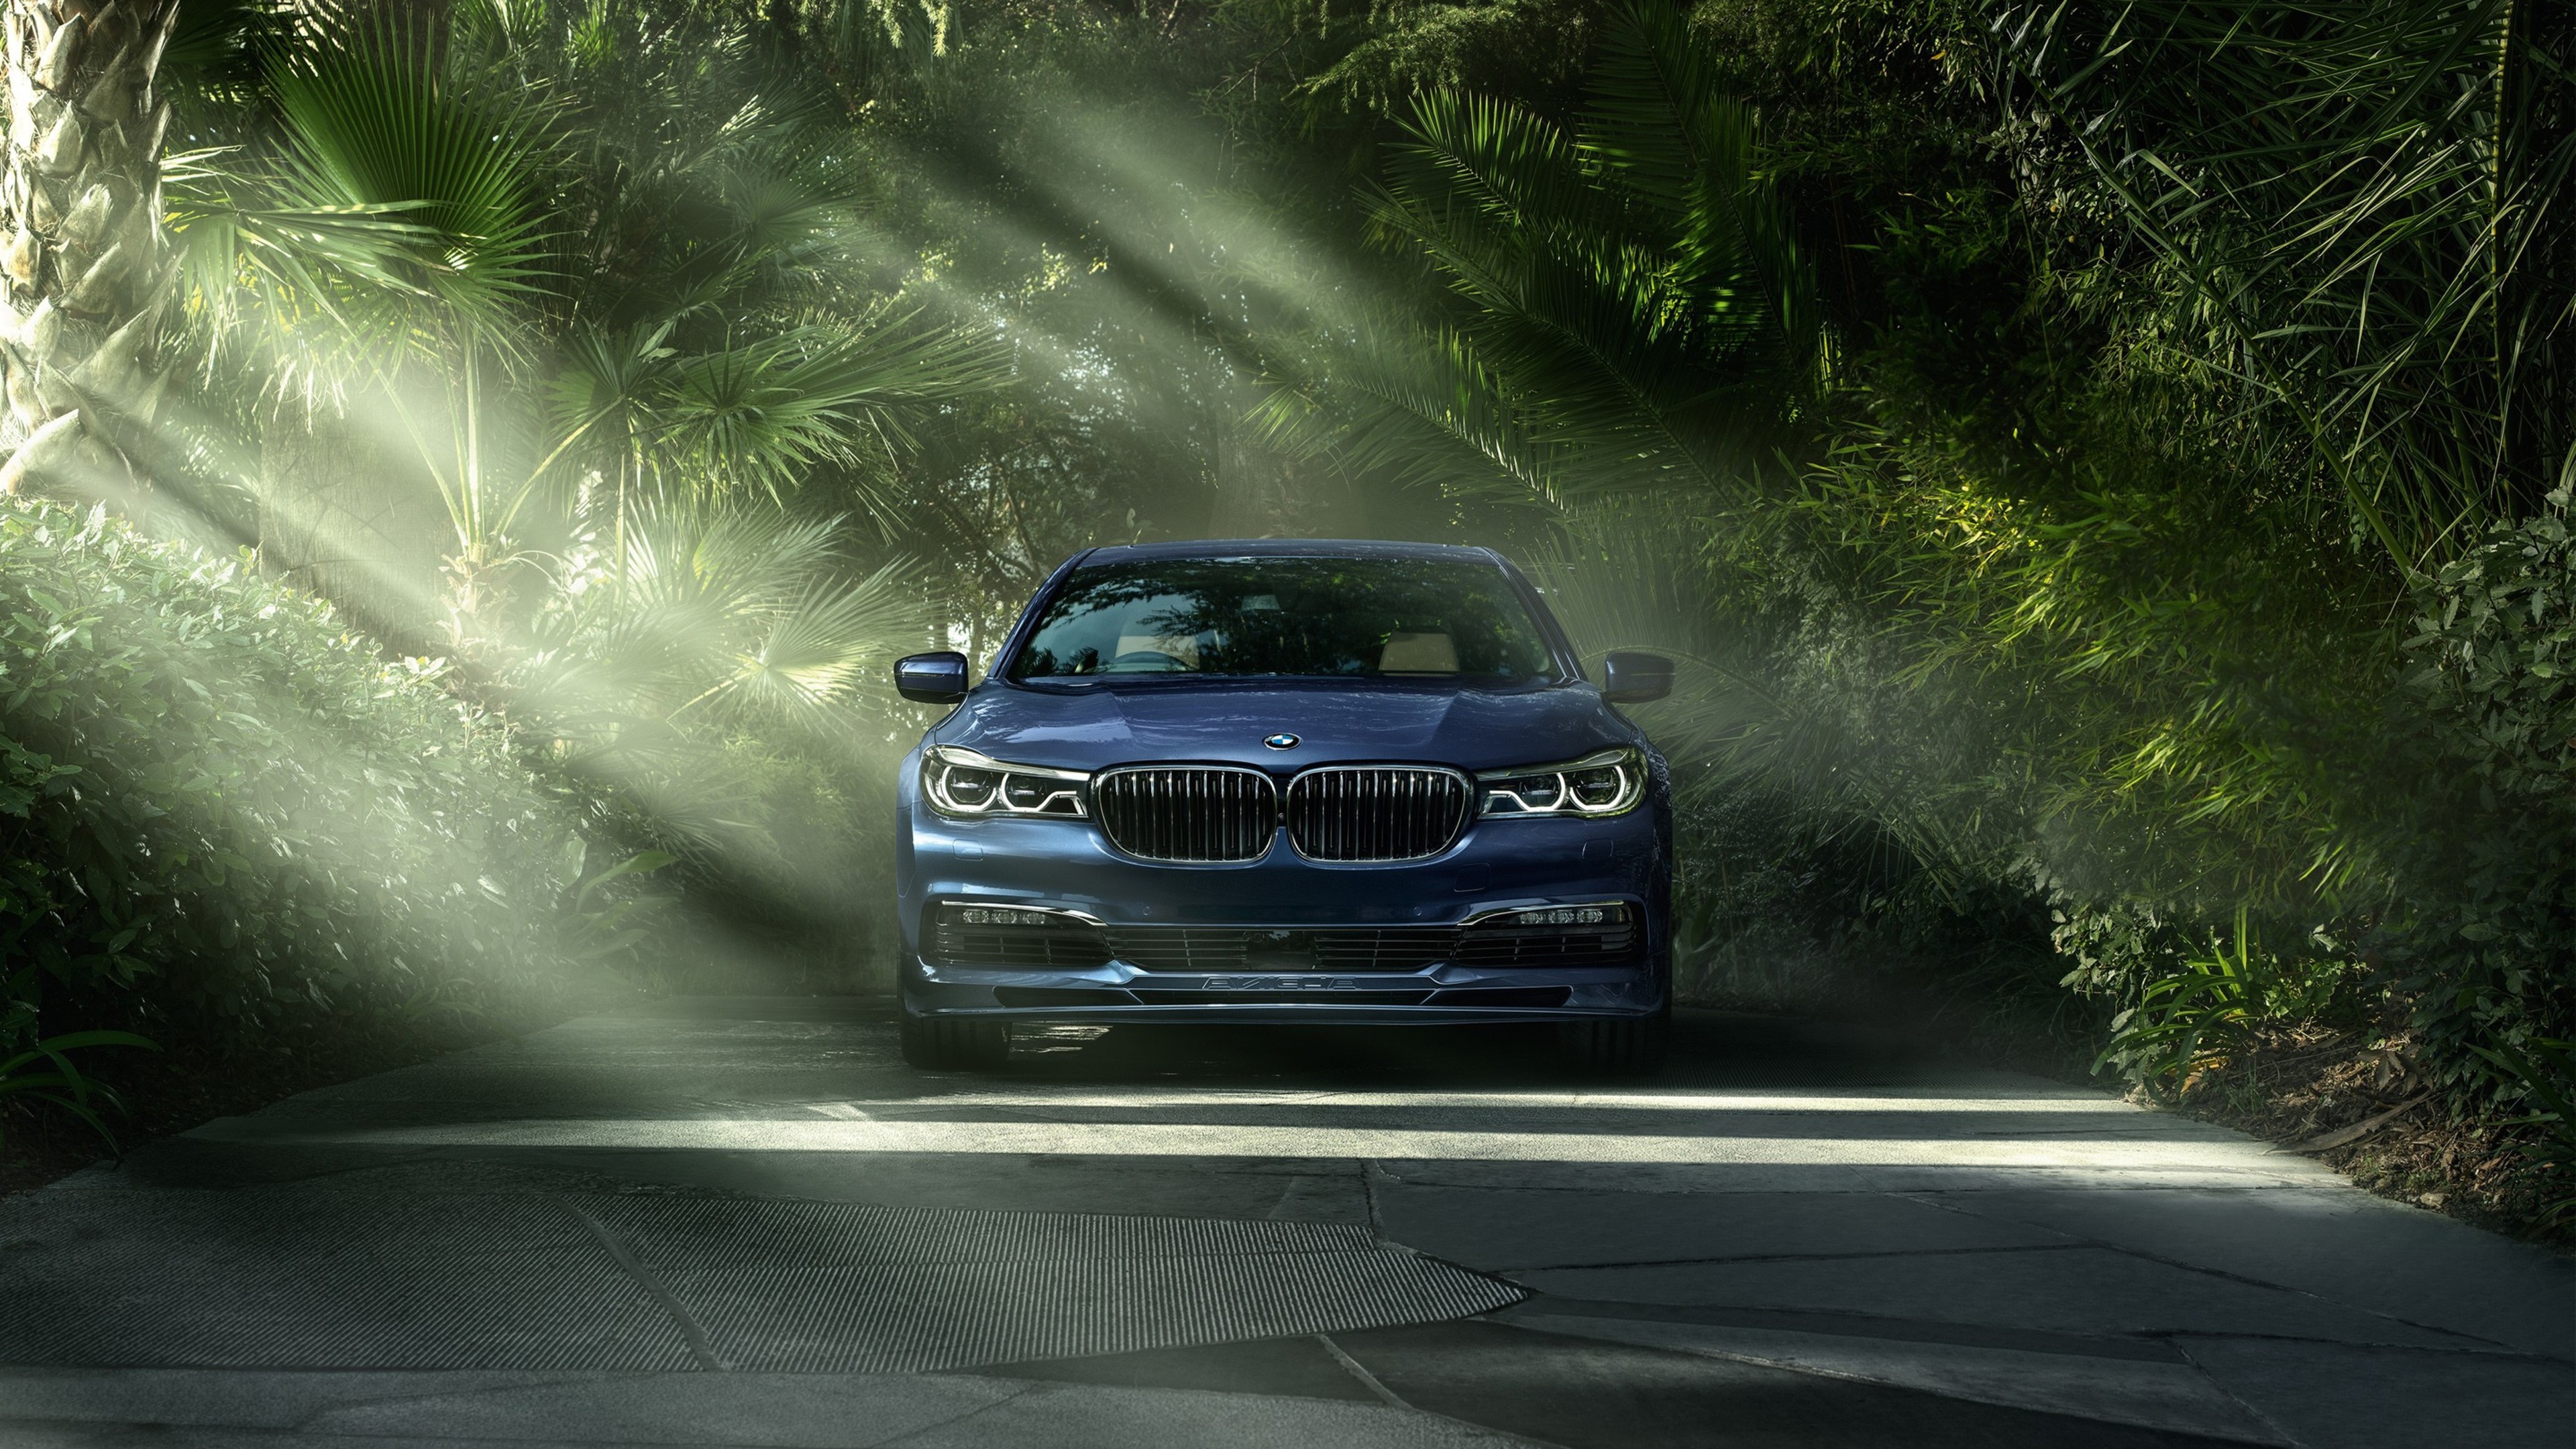 Bmw Alpina 2017, HD Cars, 4k Wallpapers, Images ...